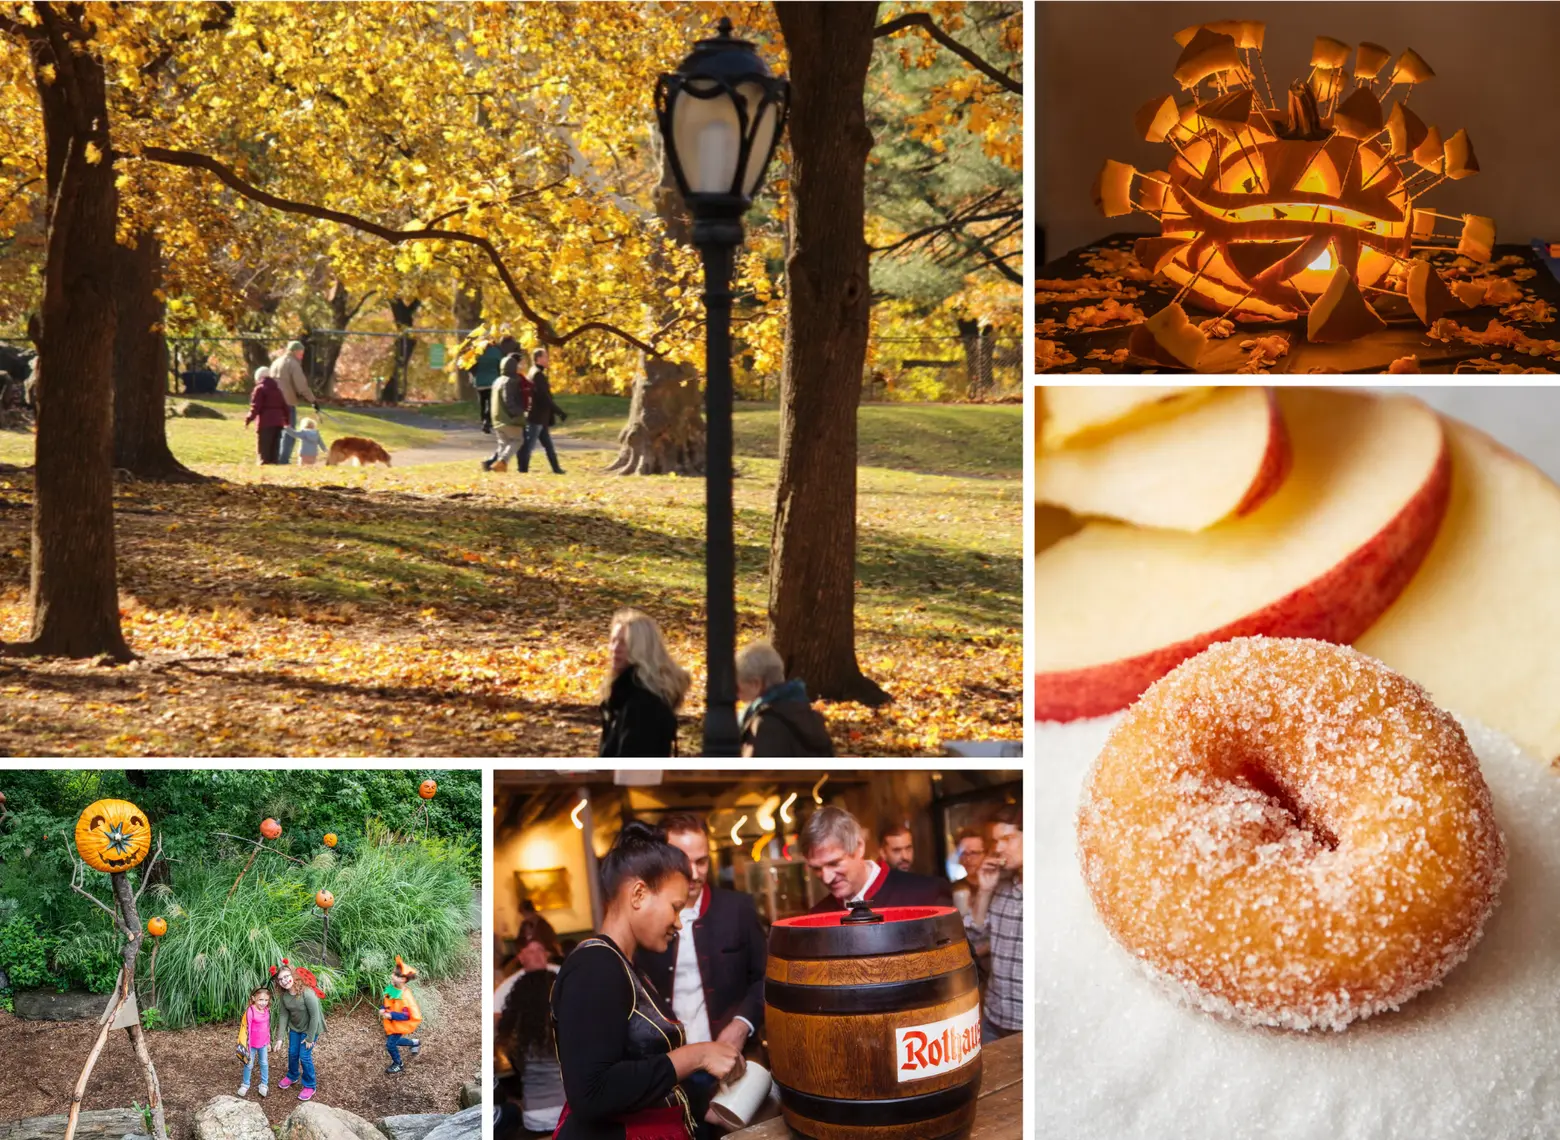 Fall in NYC: The best of autumn in the Big Apple